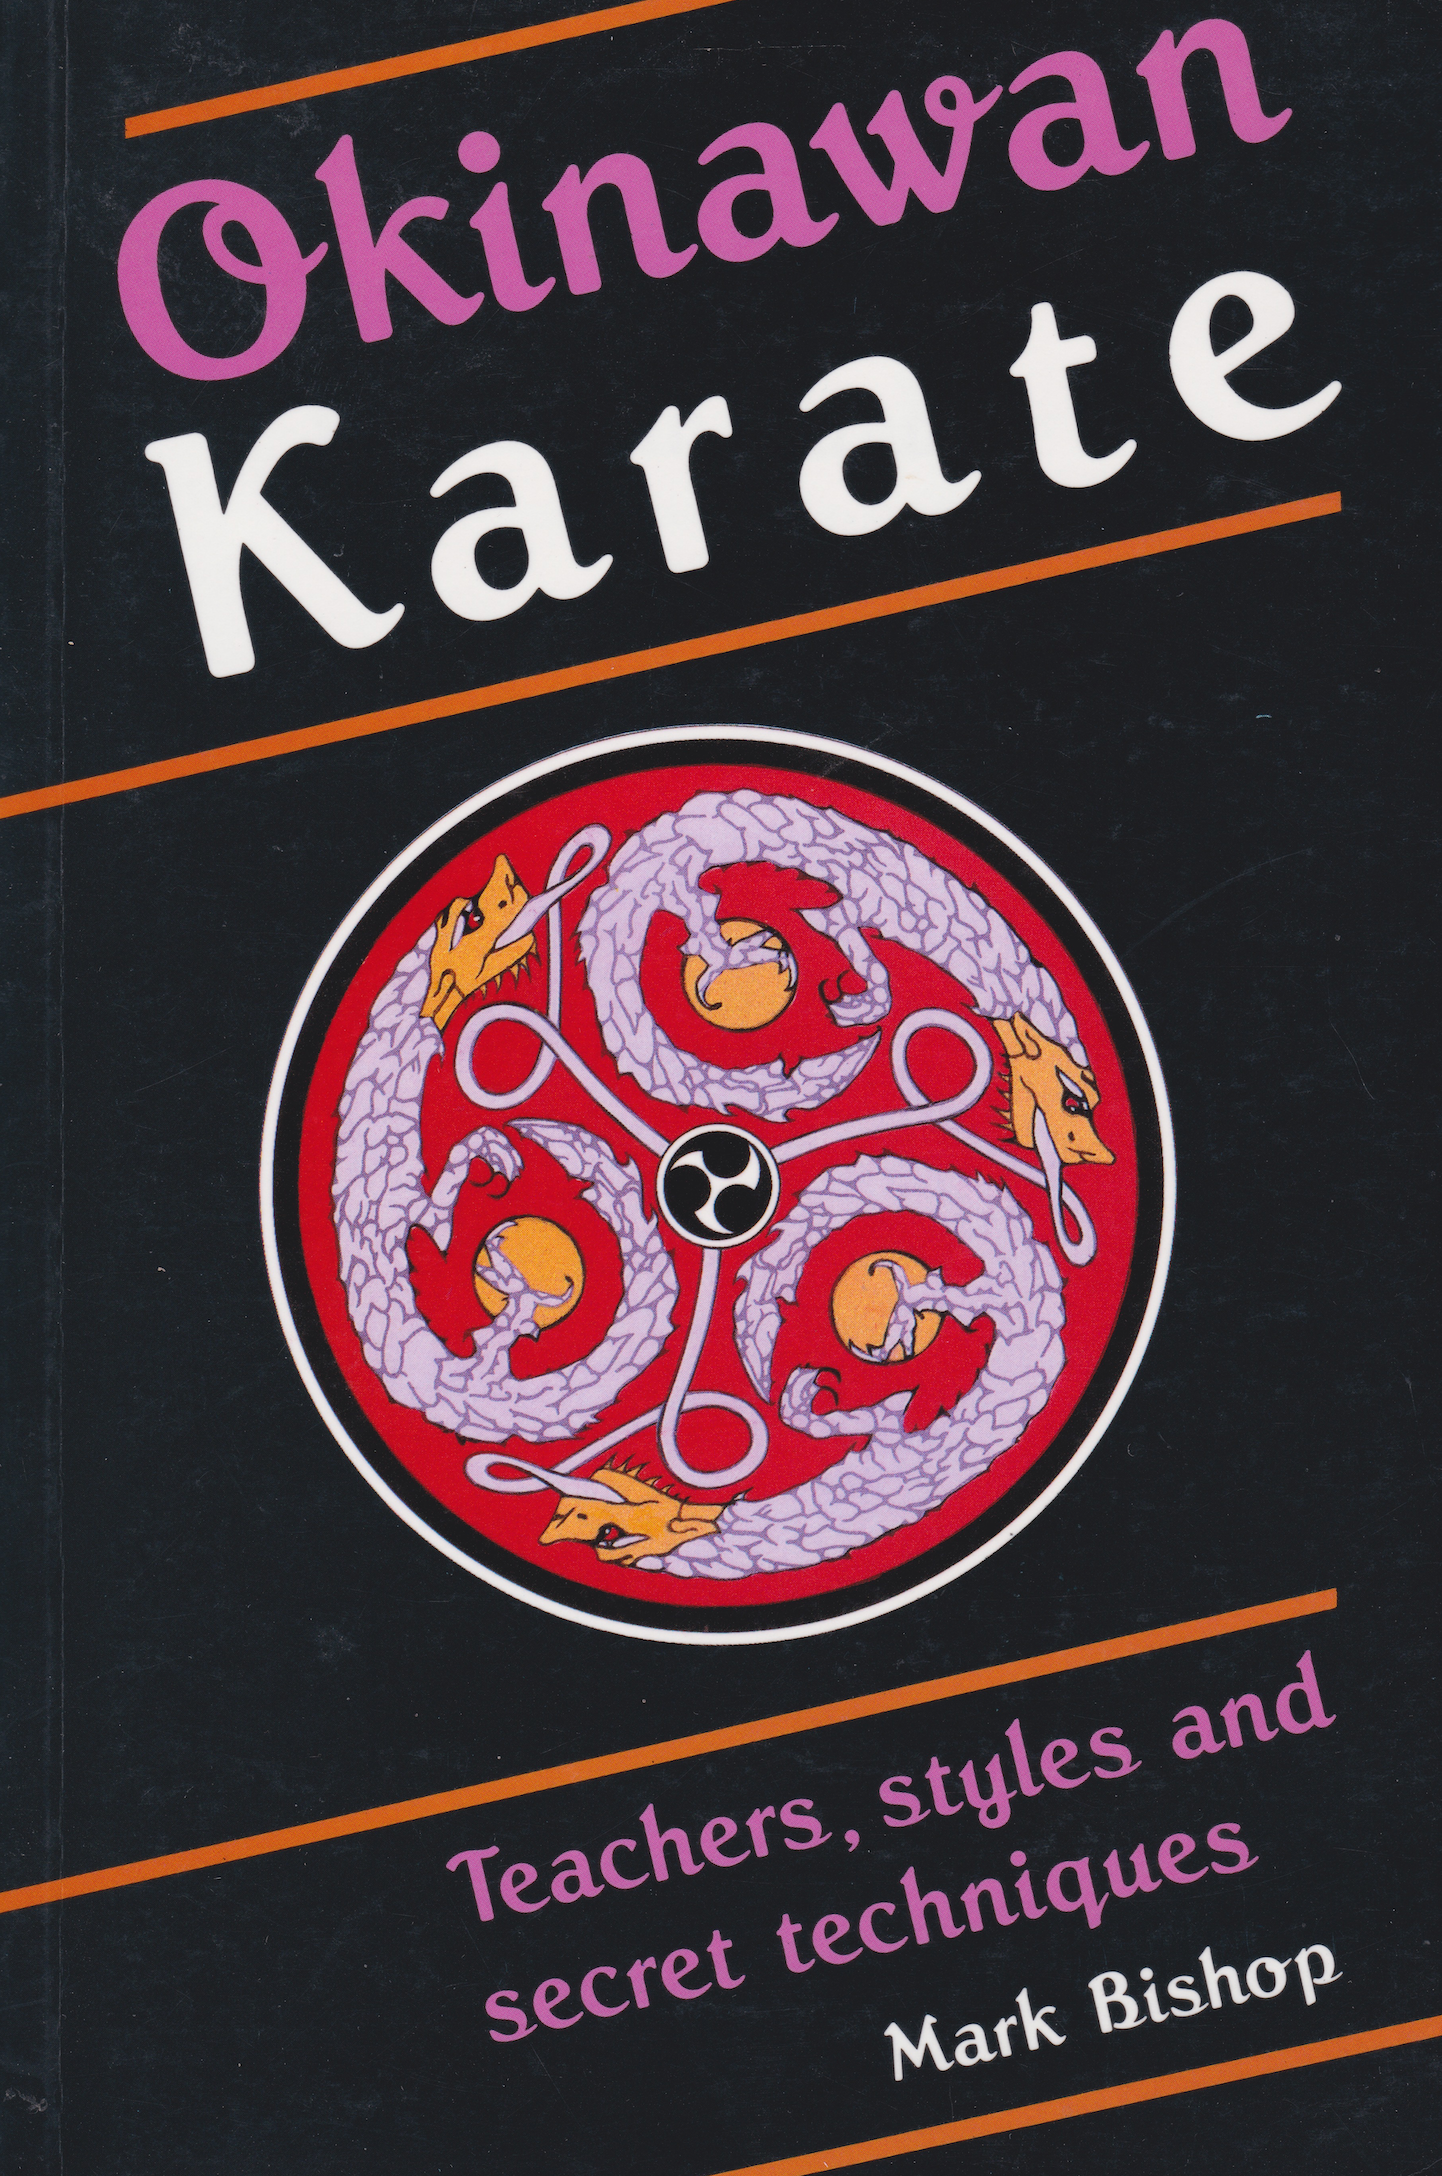 Okinawan Karate: Teachers, Styles and Secret Techniques Book by Mark Bishop (Preowned)